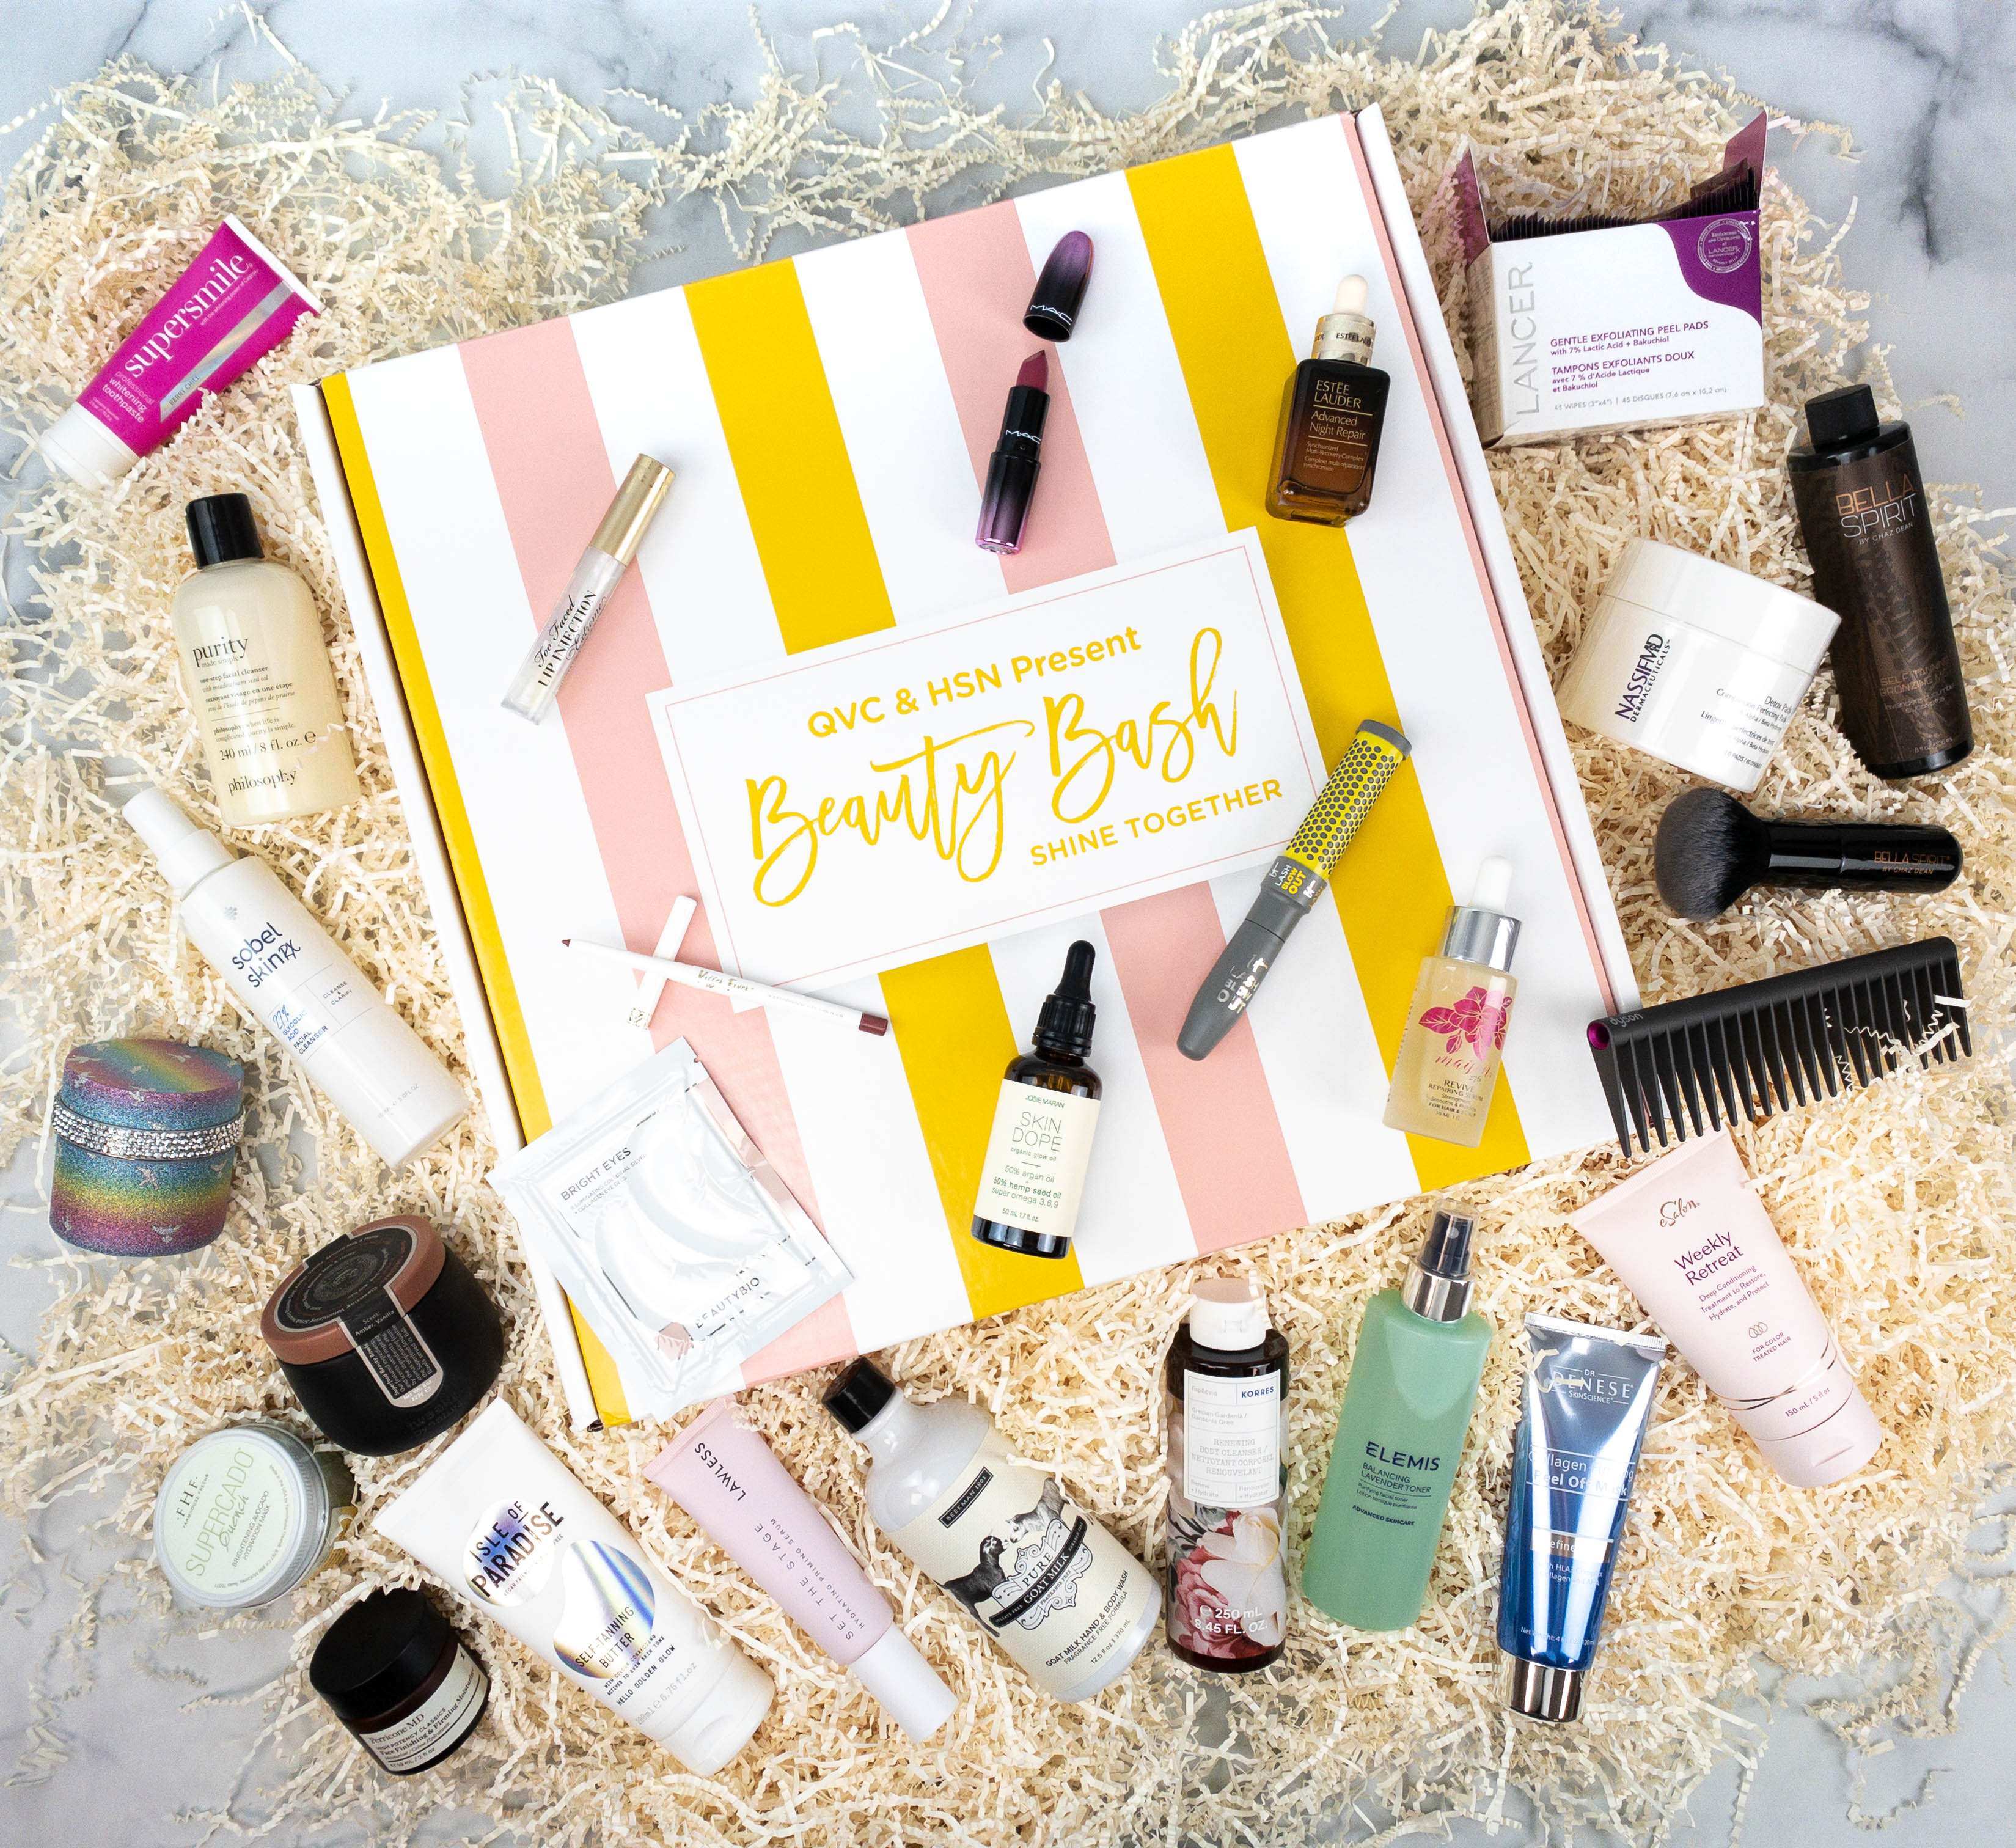 QVC & HSN 2021 Beauty Bash Discovery Box Review - Hello Subscription